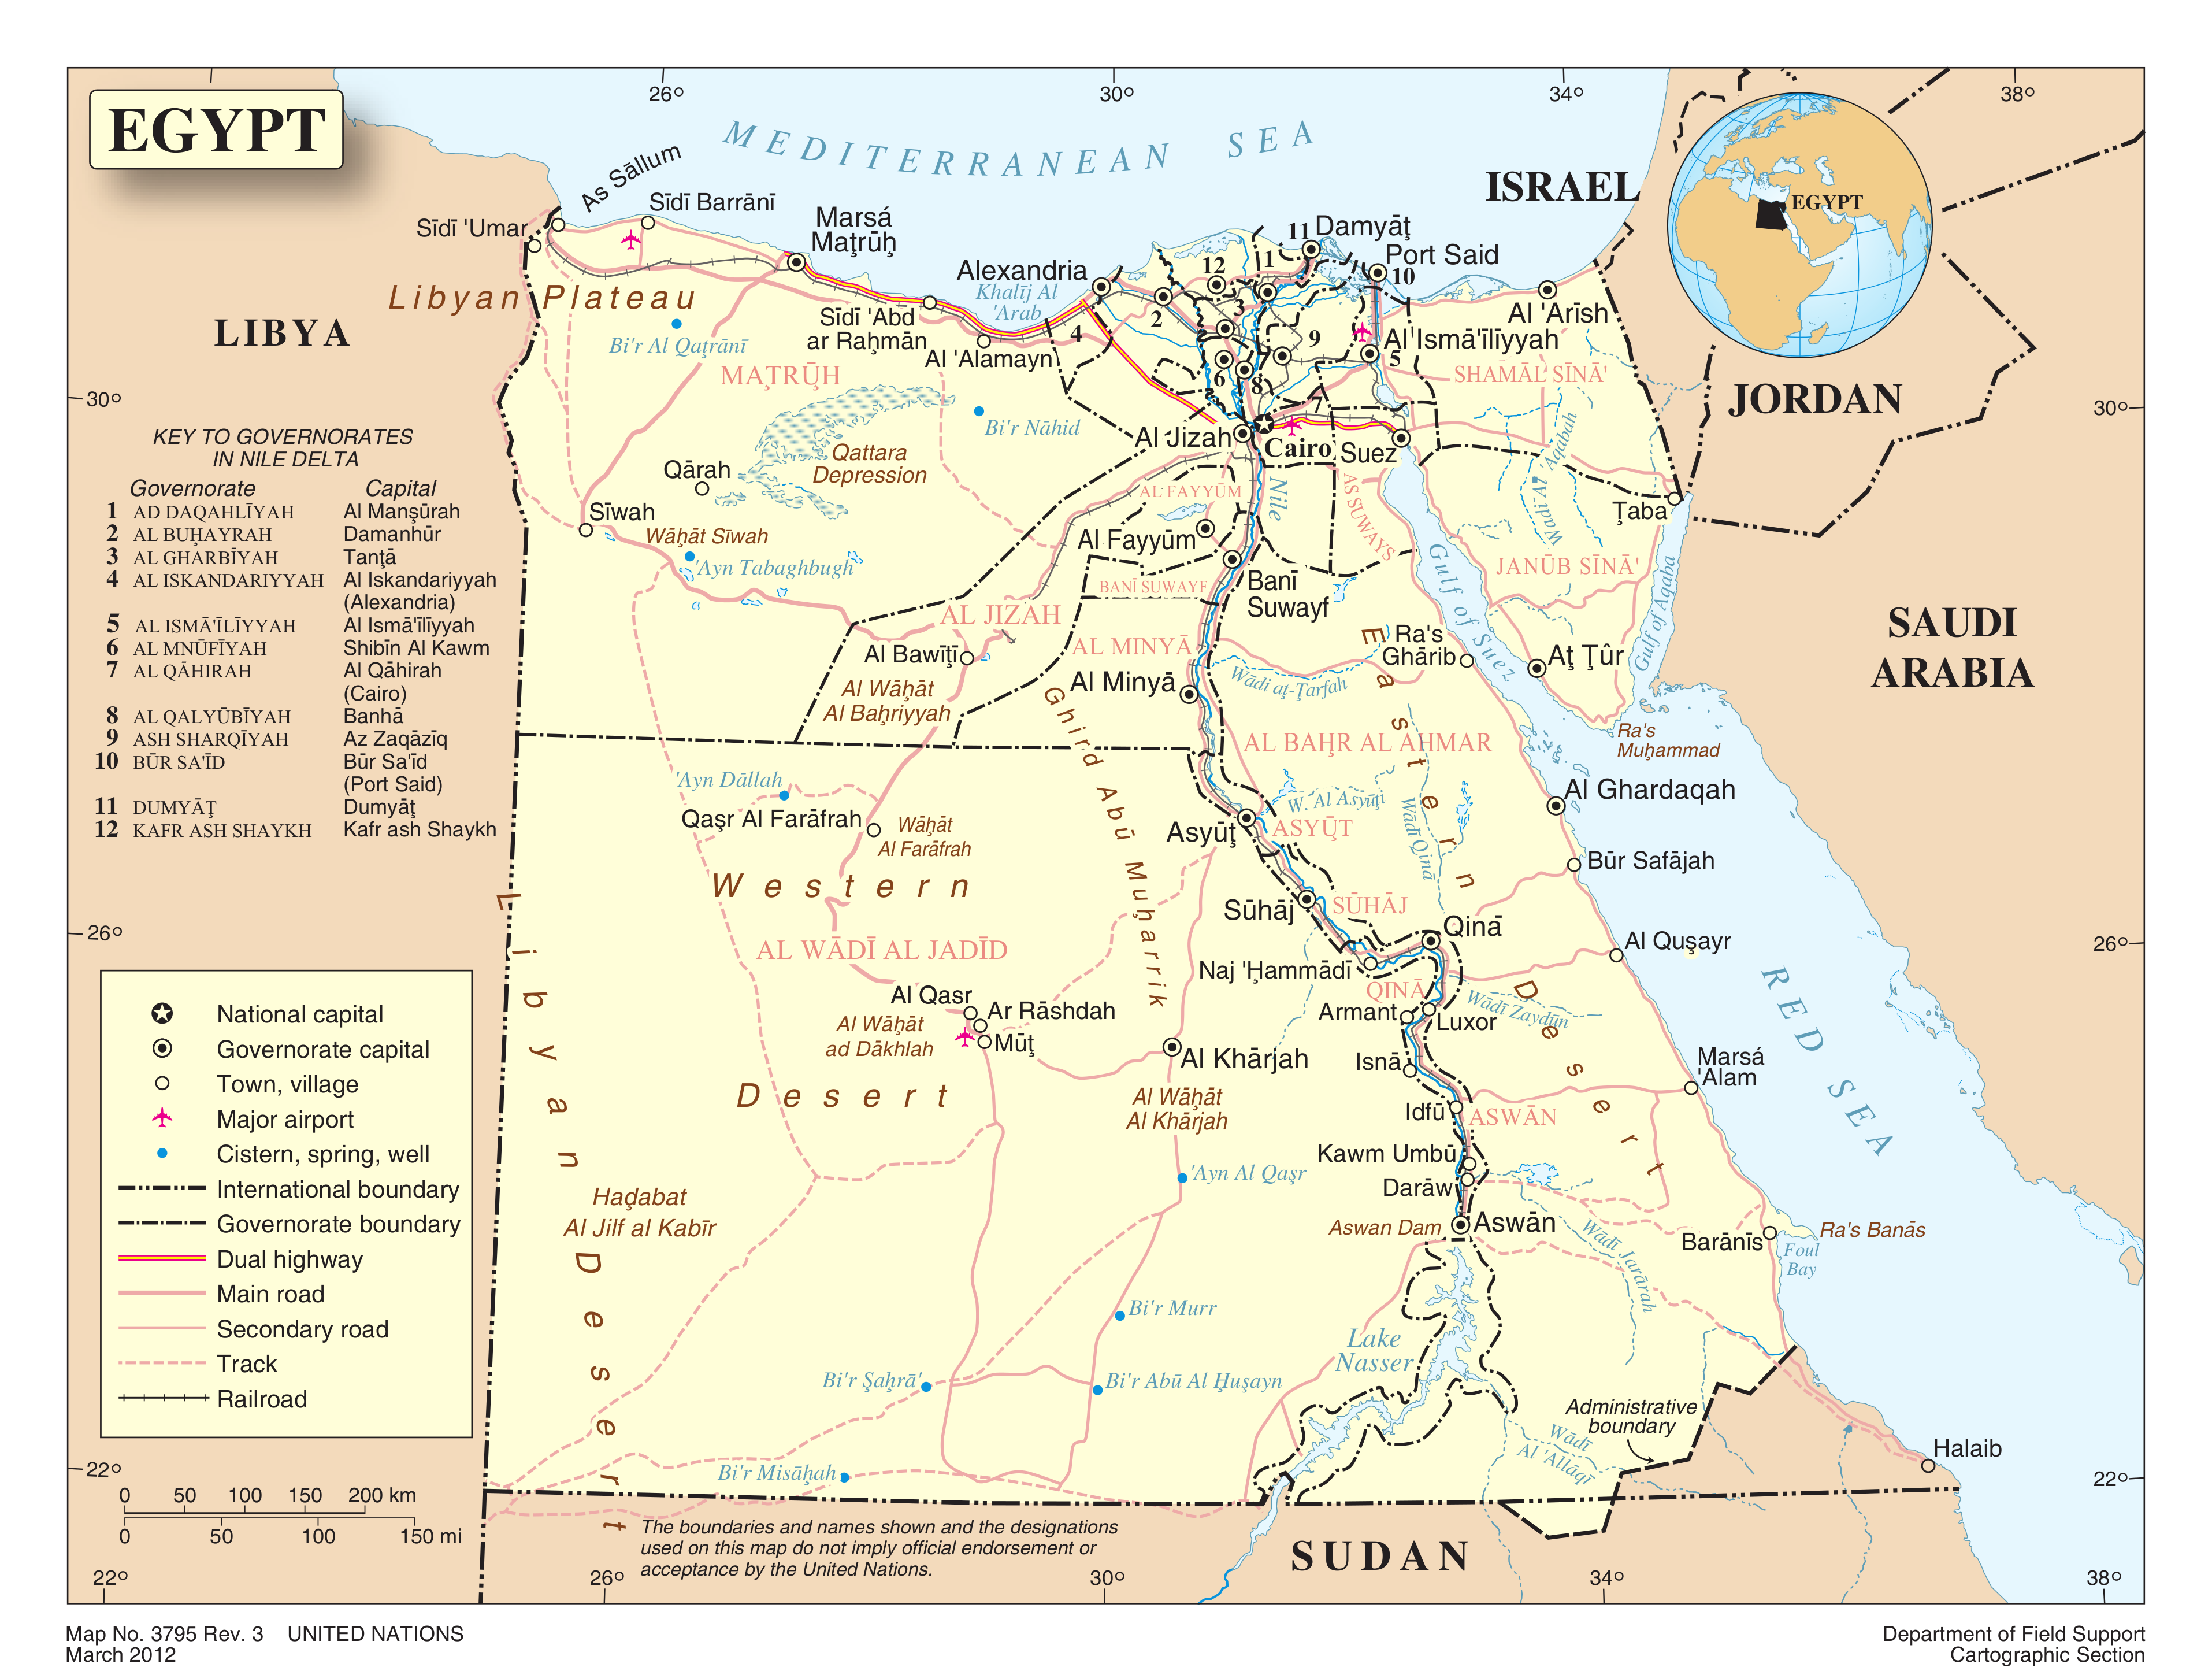 Map of Egypt by the United Nation's Cartographic Section